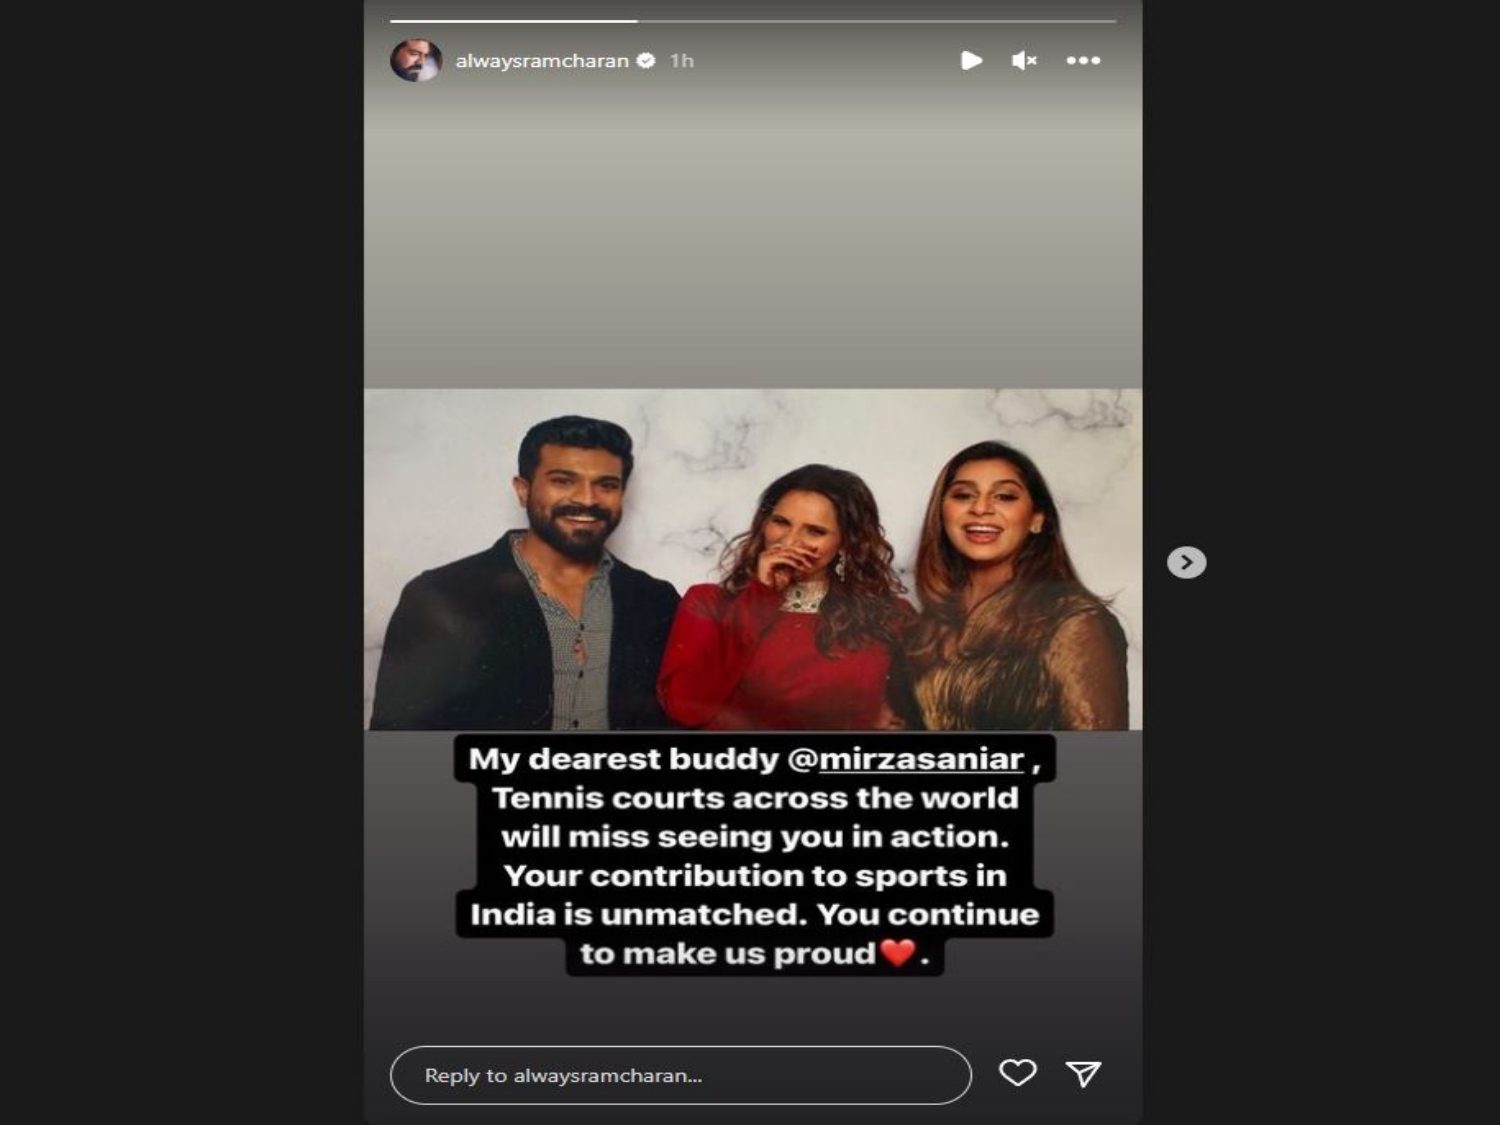 Ram Charan shares pic with 'dearest buddy' Sania Mirza, says Tennis courts will miss seeing you in action